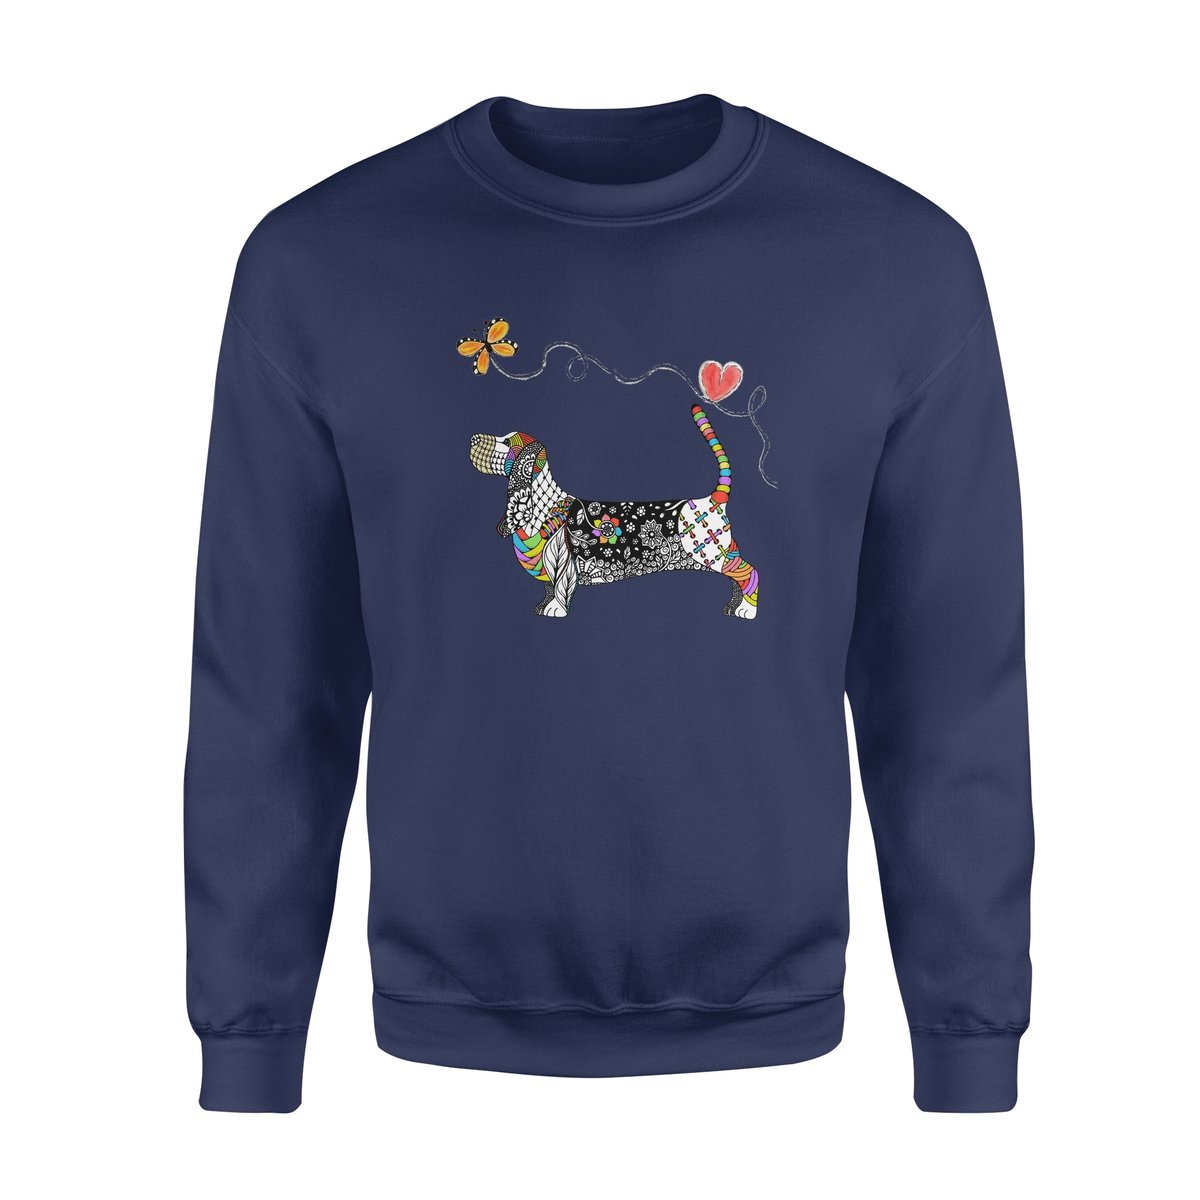 Zentangle Rainbow Basset – Premium Crew Neck Sweatshirt, Gift For Dog Lover, Gift For Basset Lover T-Shirt Hoodie All Color Size S-5Xl